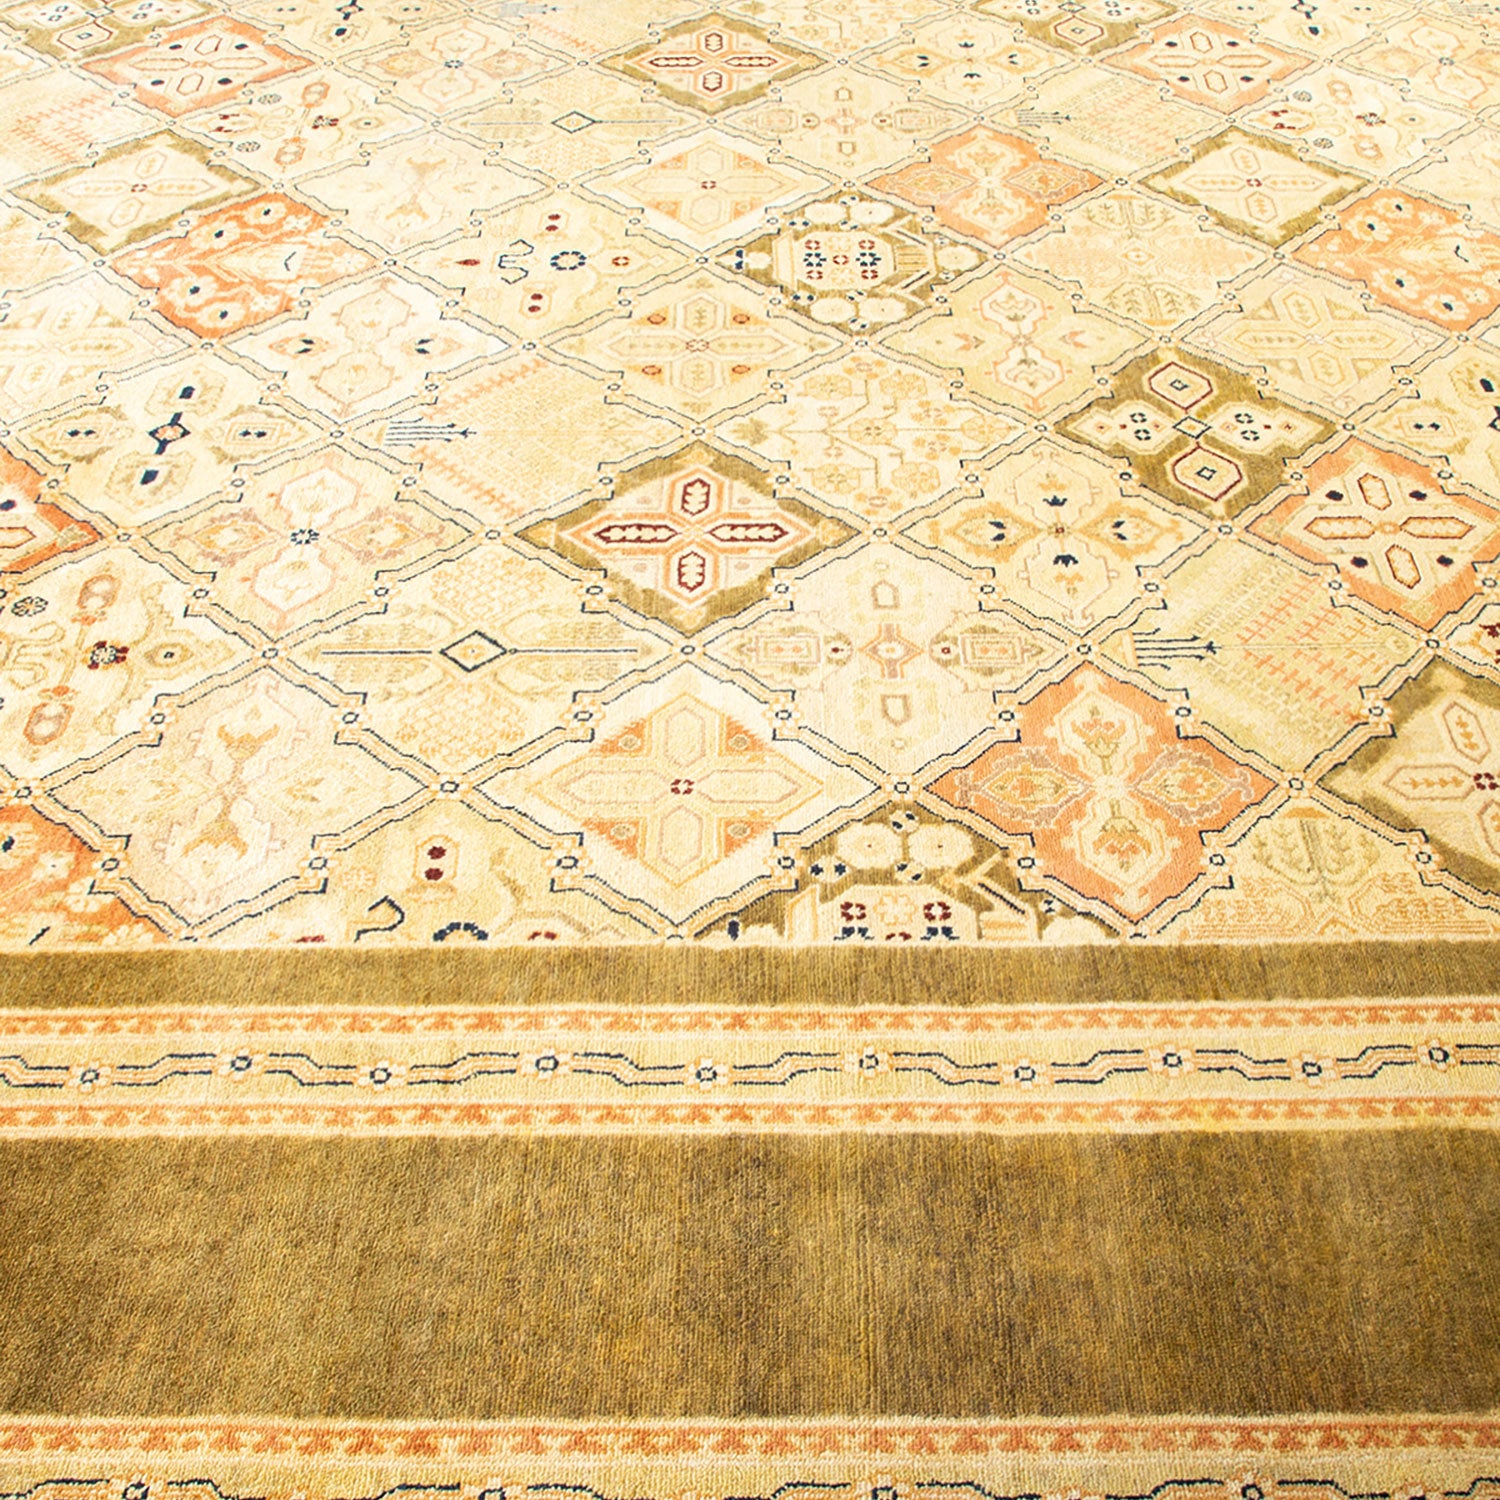 Intricate handcrafted rug featuring geometric patterns and warm earth tones.